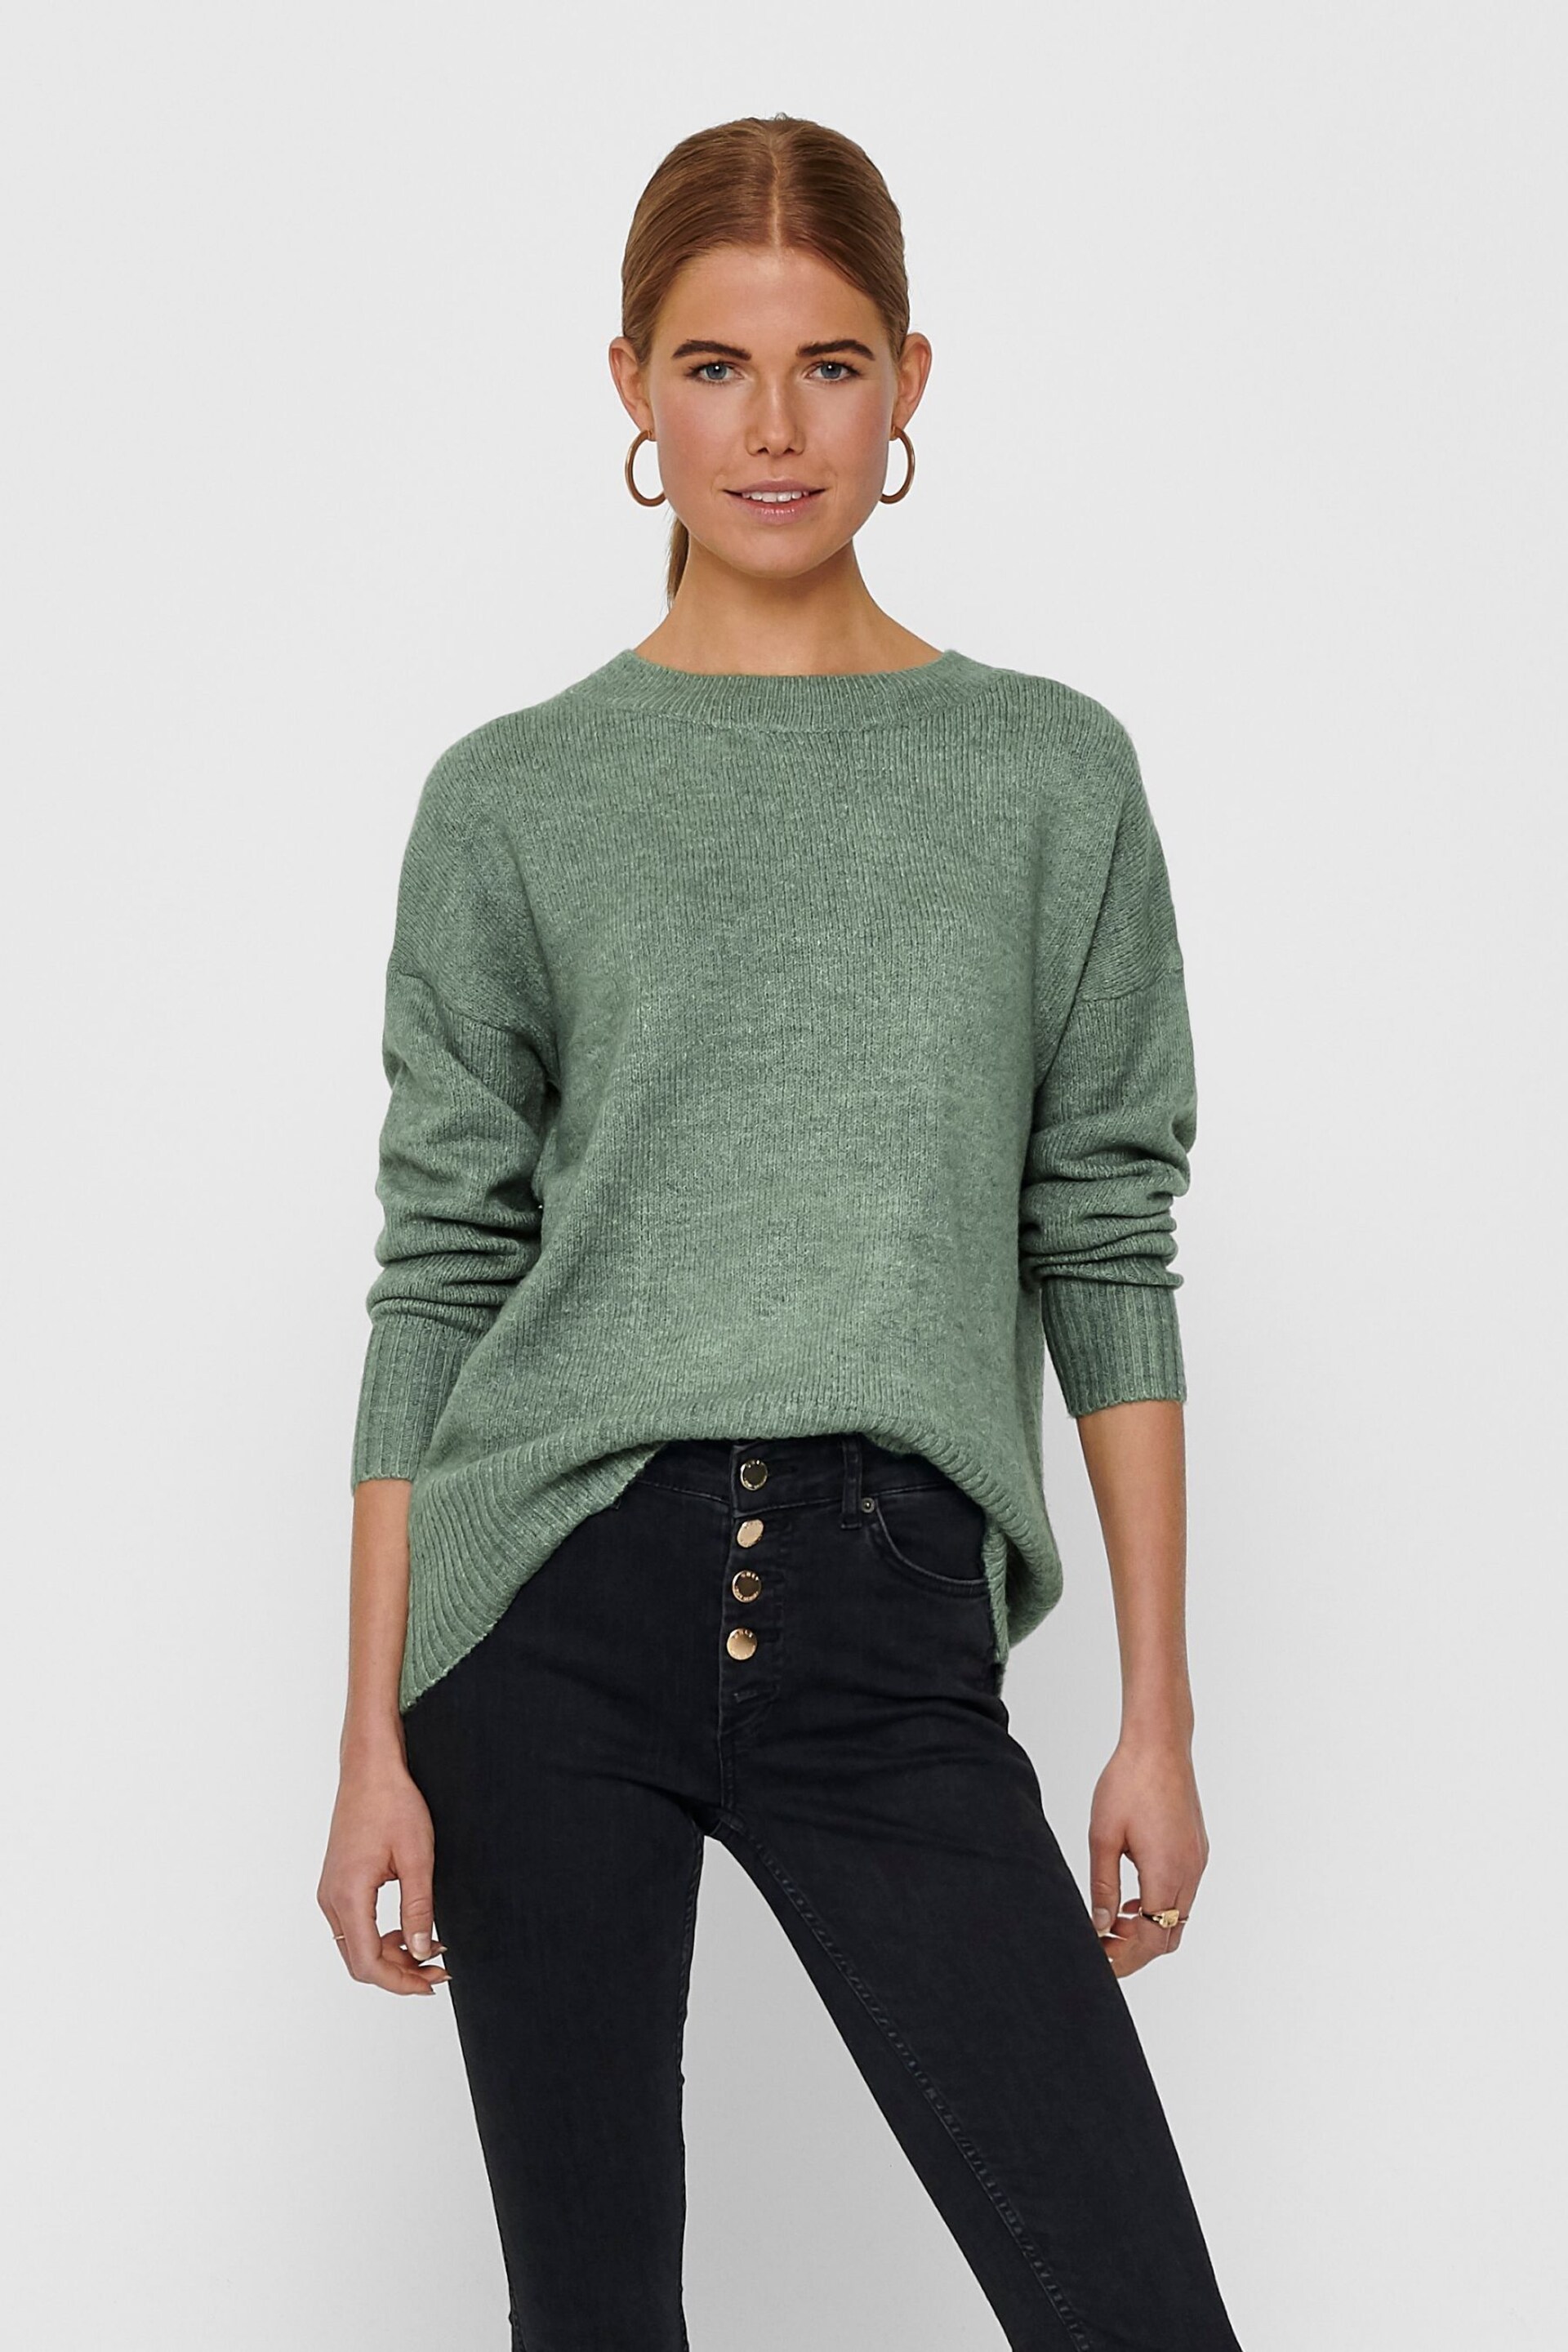 ONLY Green Round Neck Longline Tunic Soft Jumper - Image 1 of 2